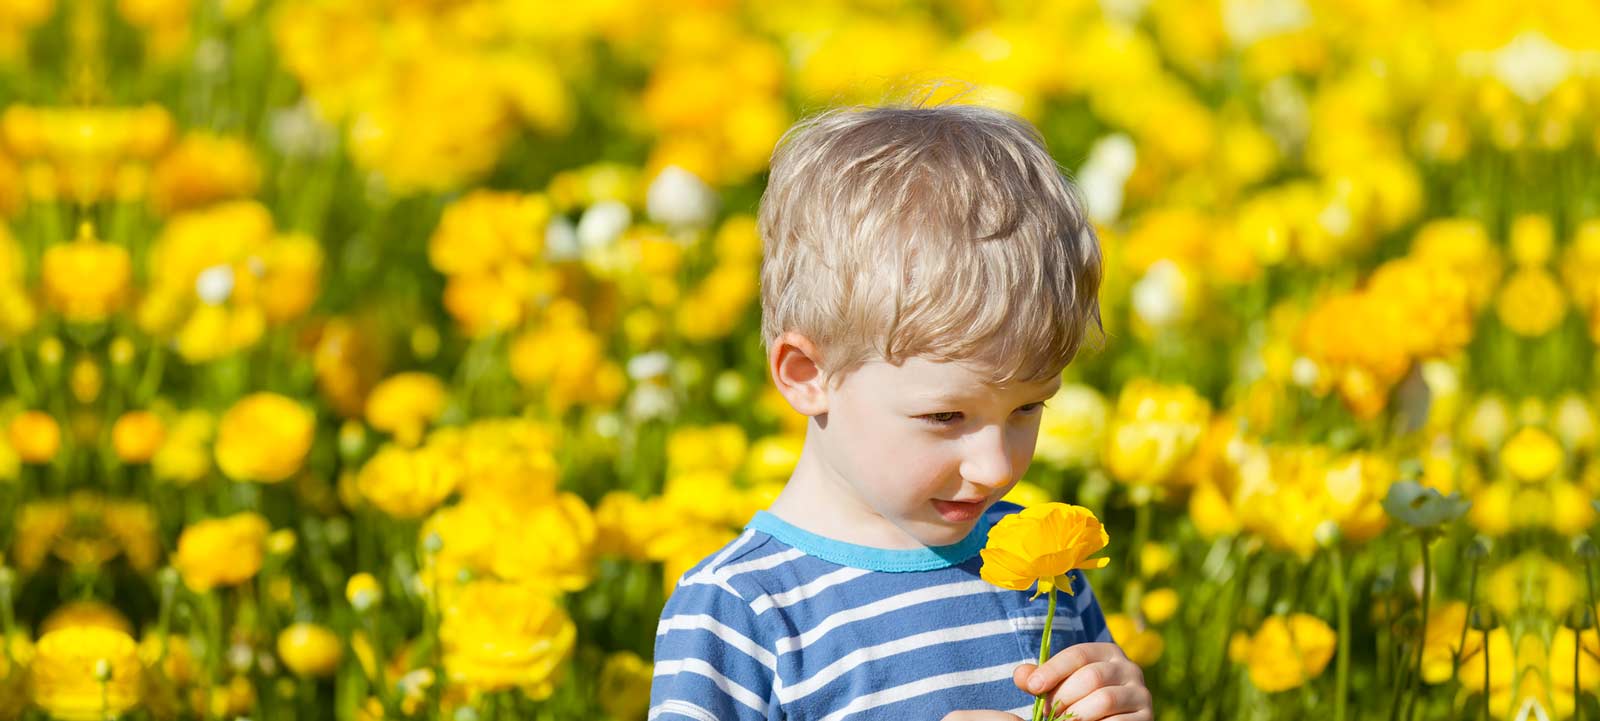 How Much Do You Remember from Elementary School Science? person smelling flowers